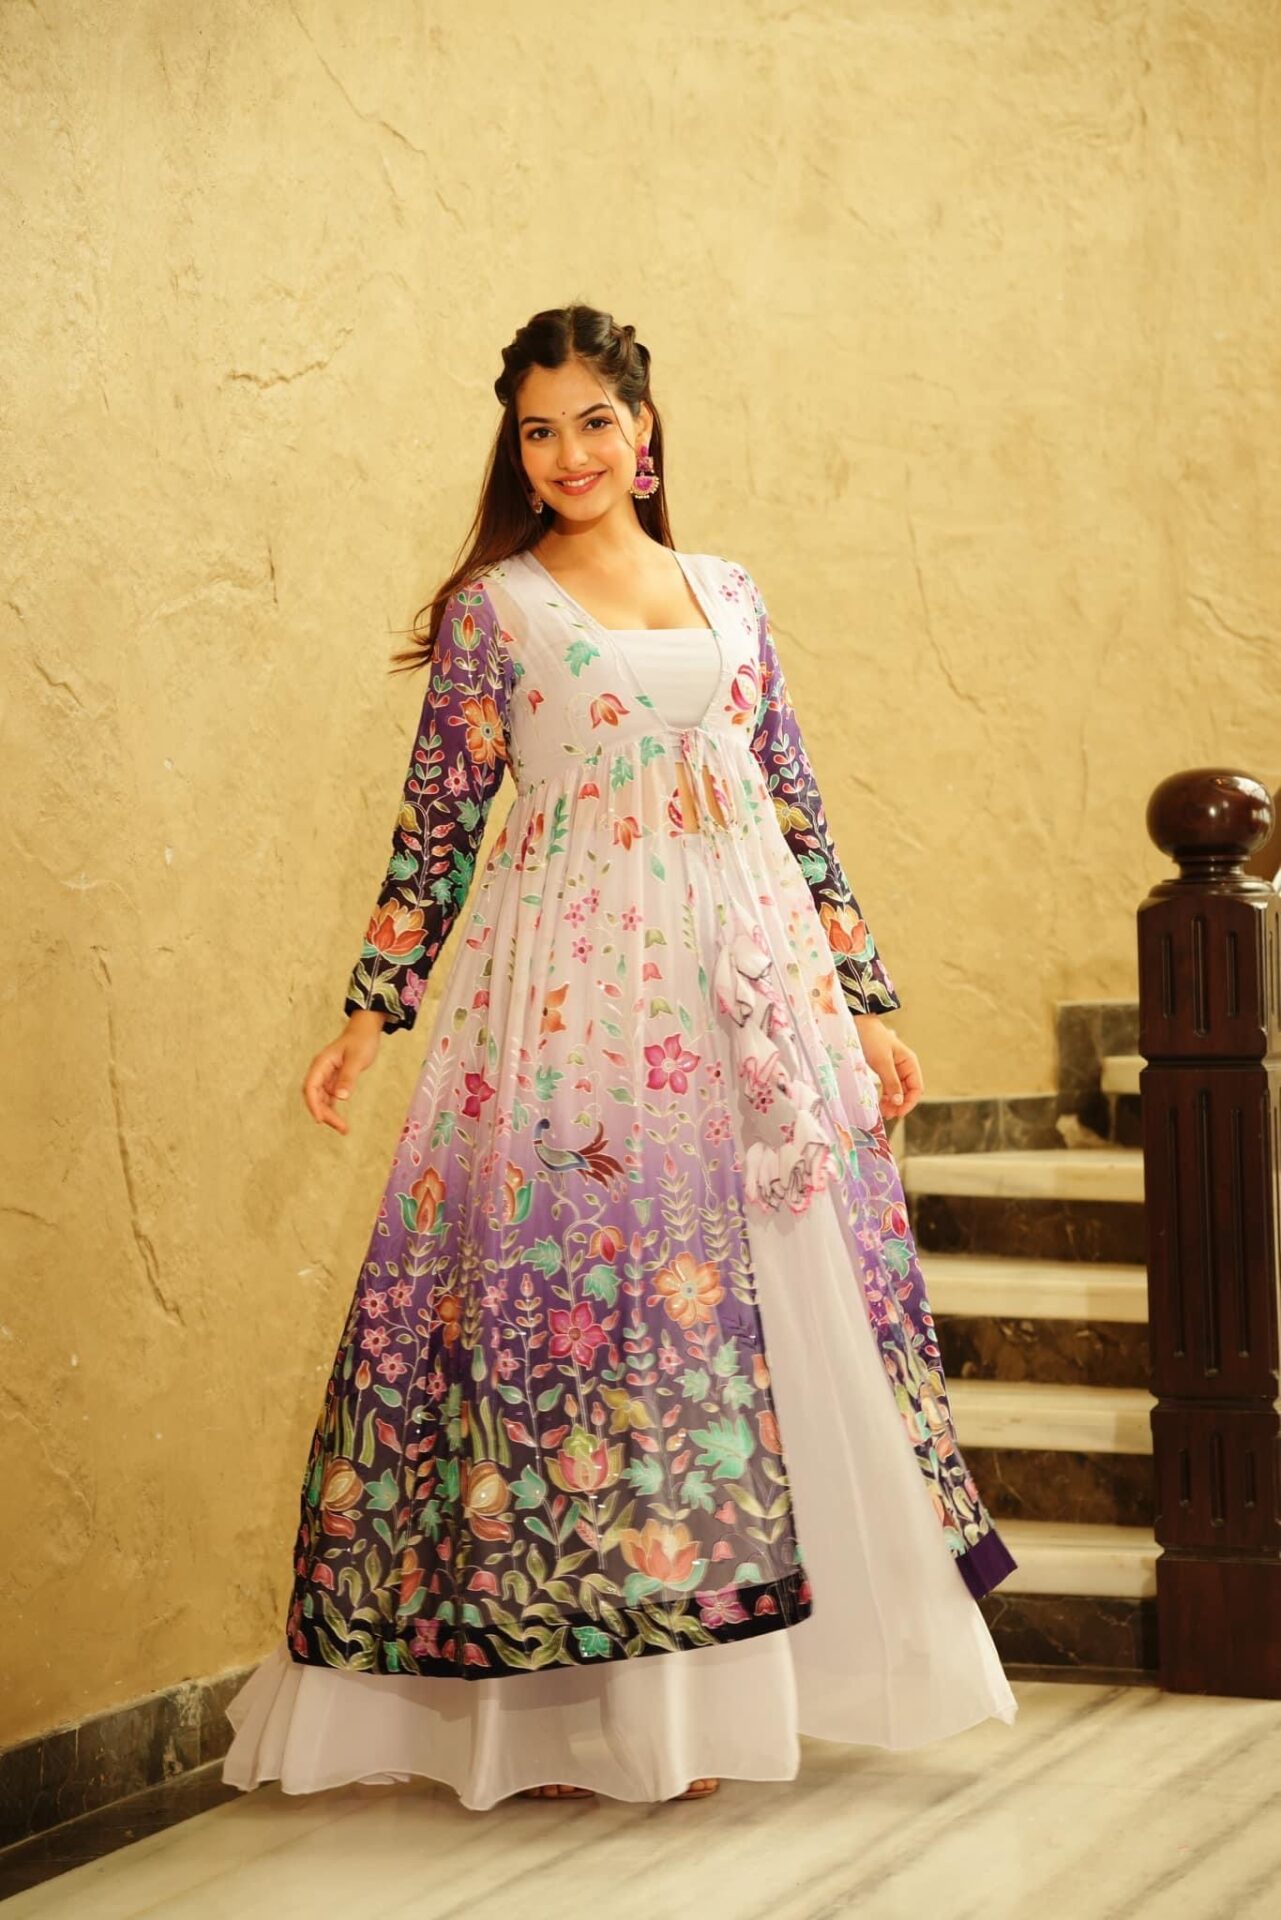 Textileexport: Wholesale Indian women clothing manufacturer & supplier from  India